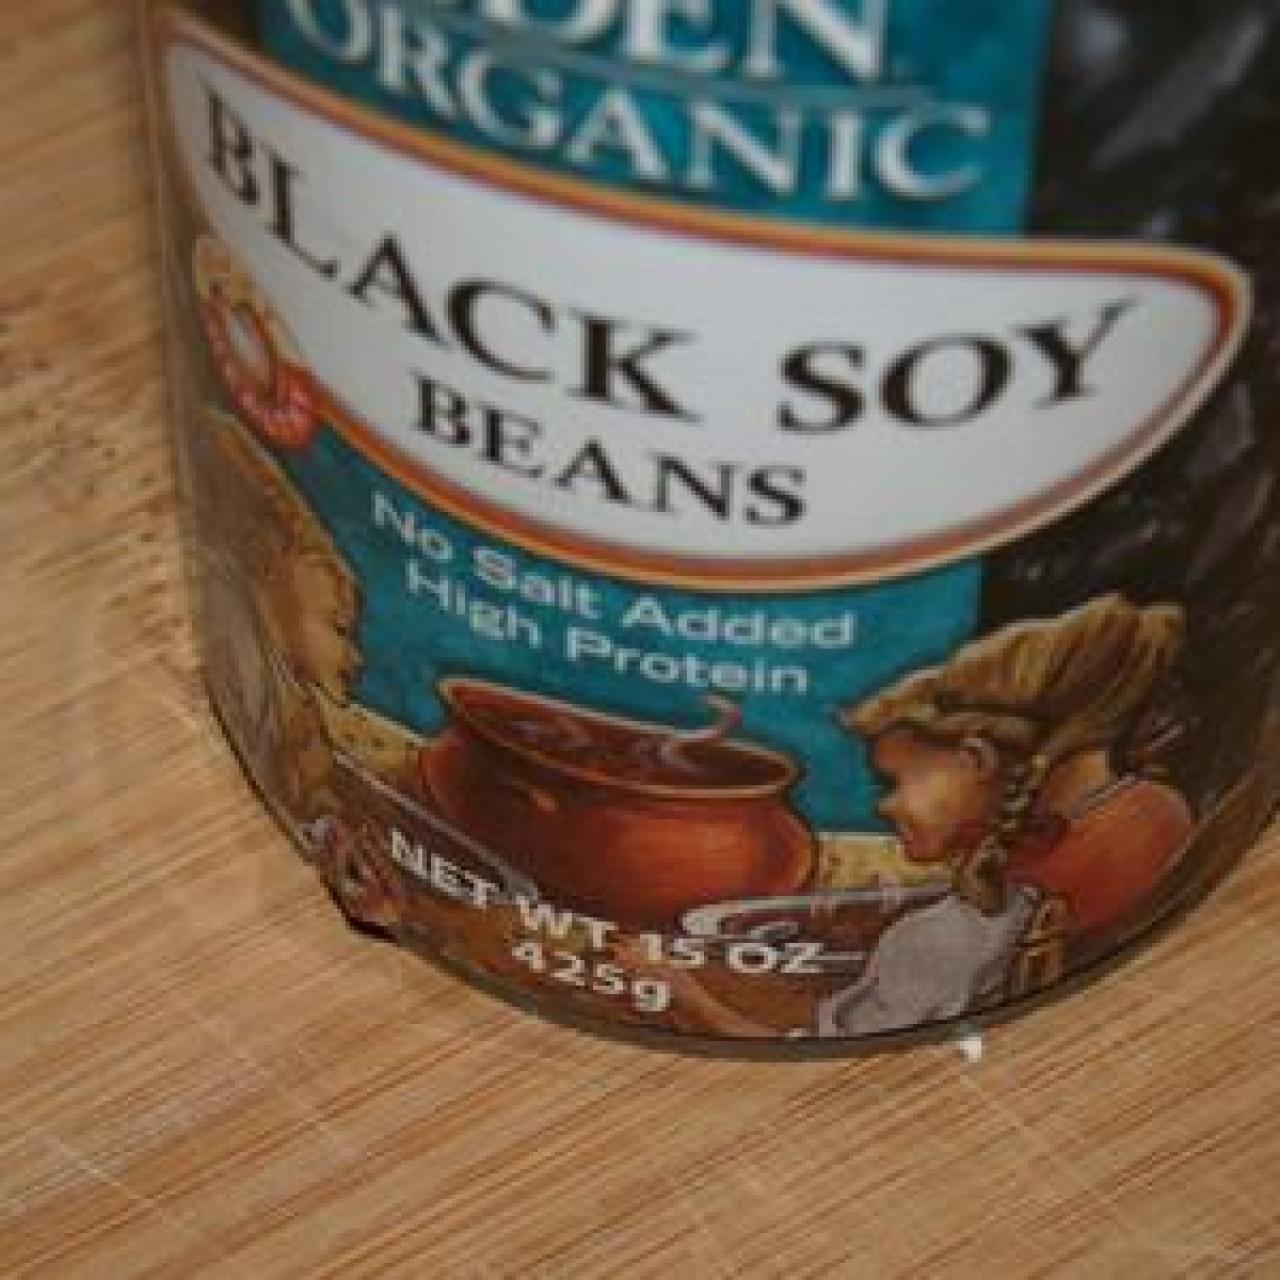 7 Best Low Sodium Foods - Low-Sodium Food List for Shopping